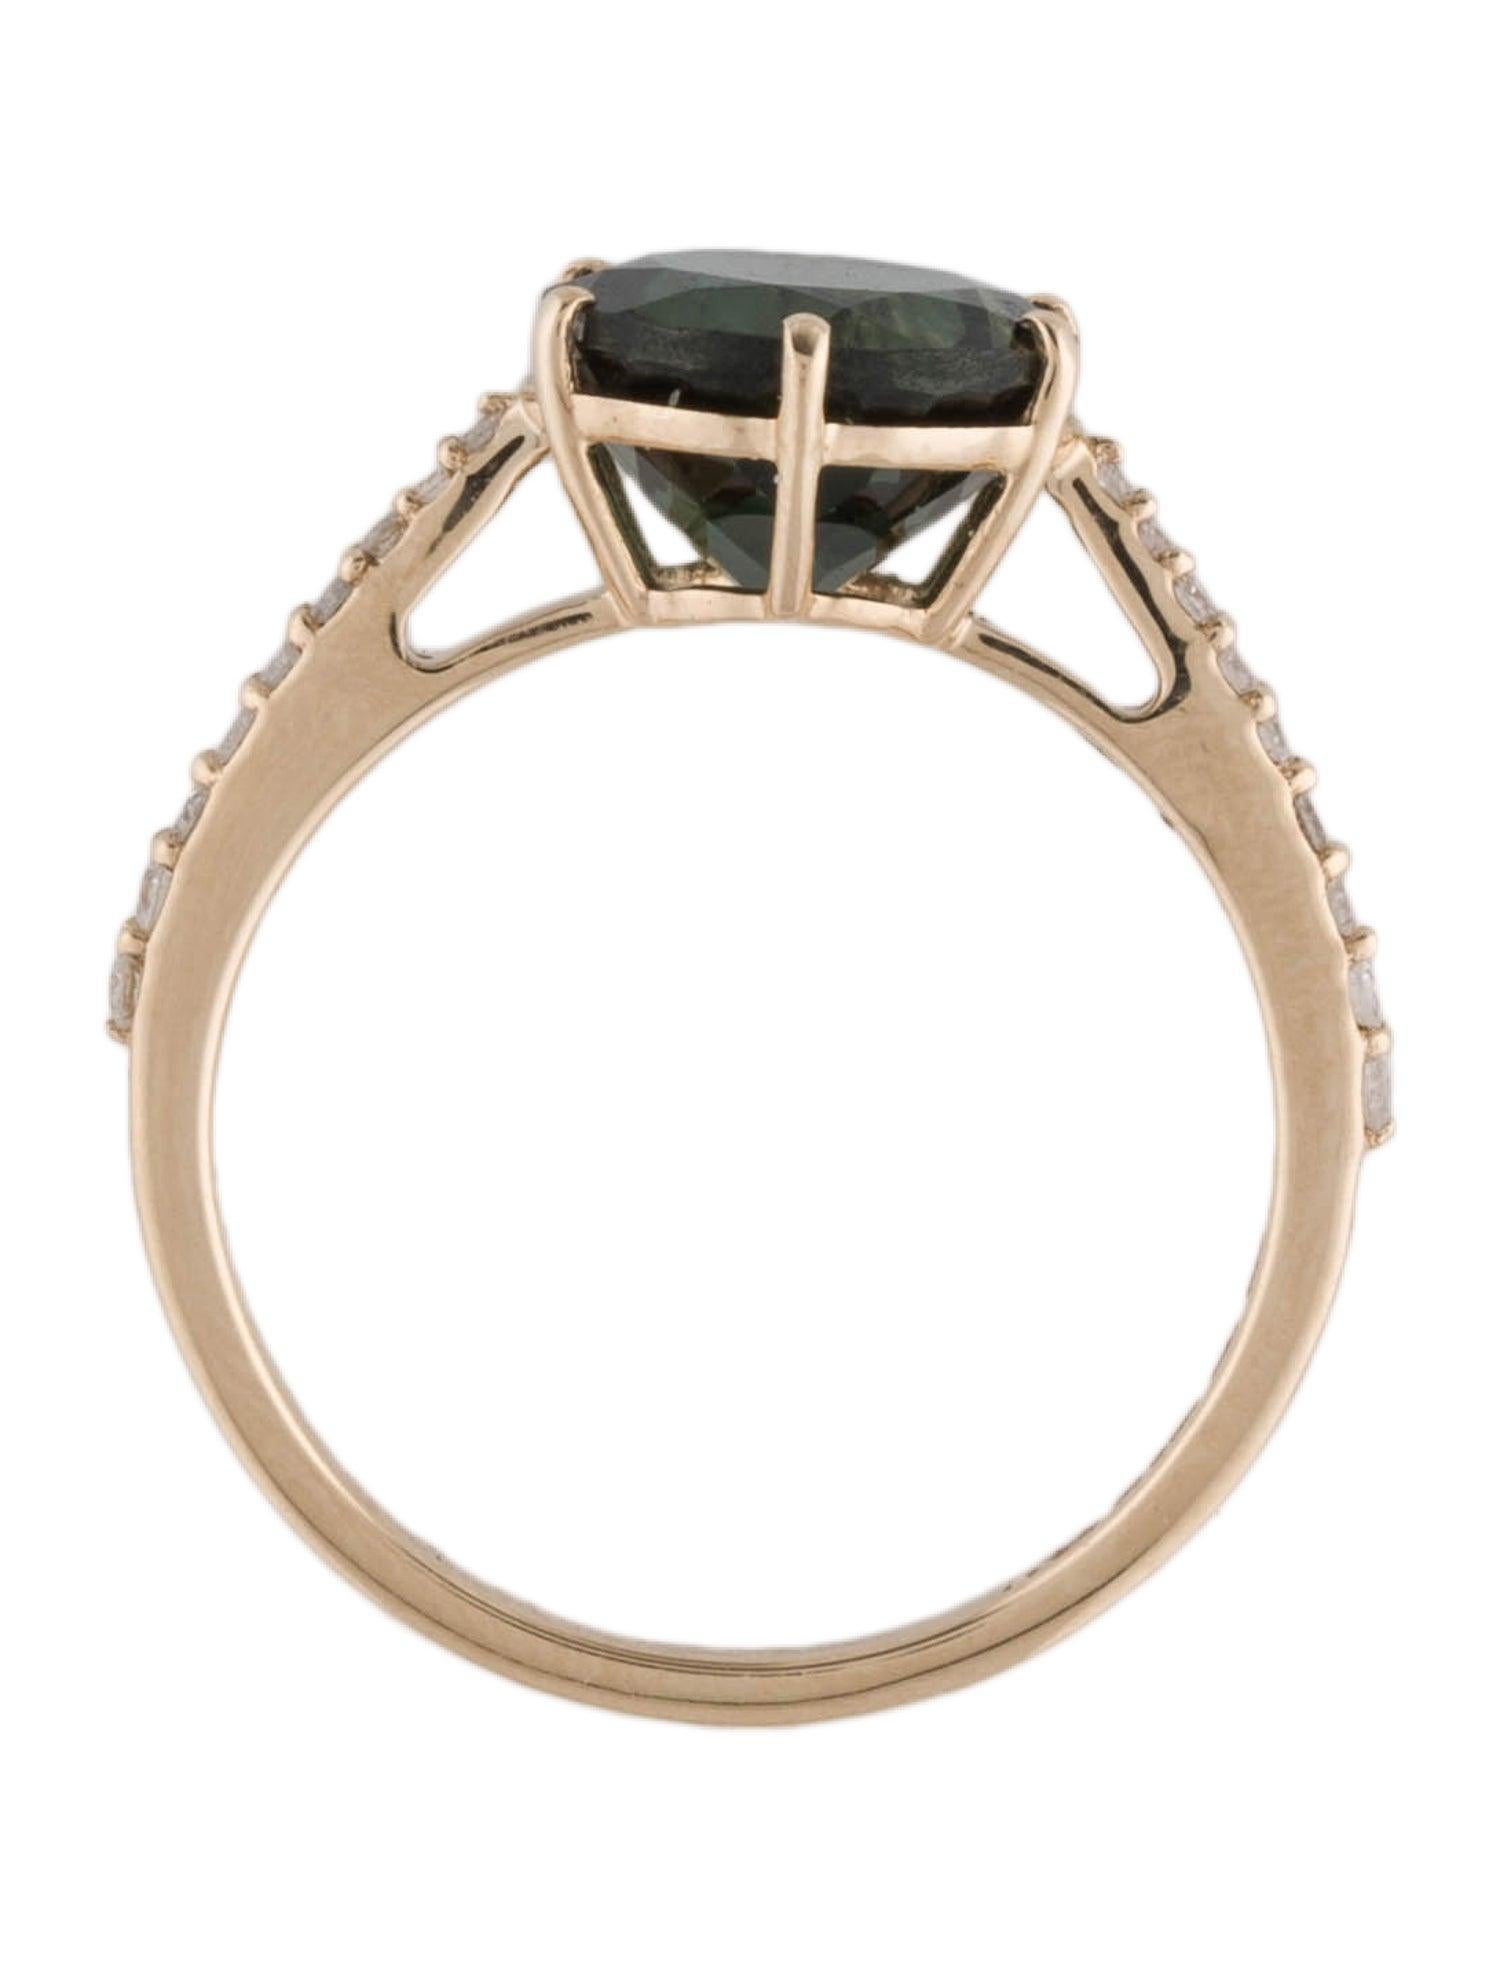 Elegant 14K Gold 2.35ctw Tourmaline & Diamond Cocktail Ring - Size 7 - Unique In New Condition For Sale In Holtsville, NY